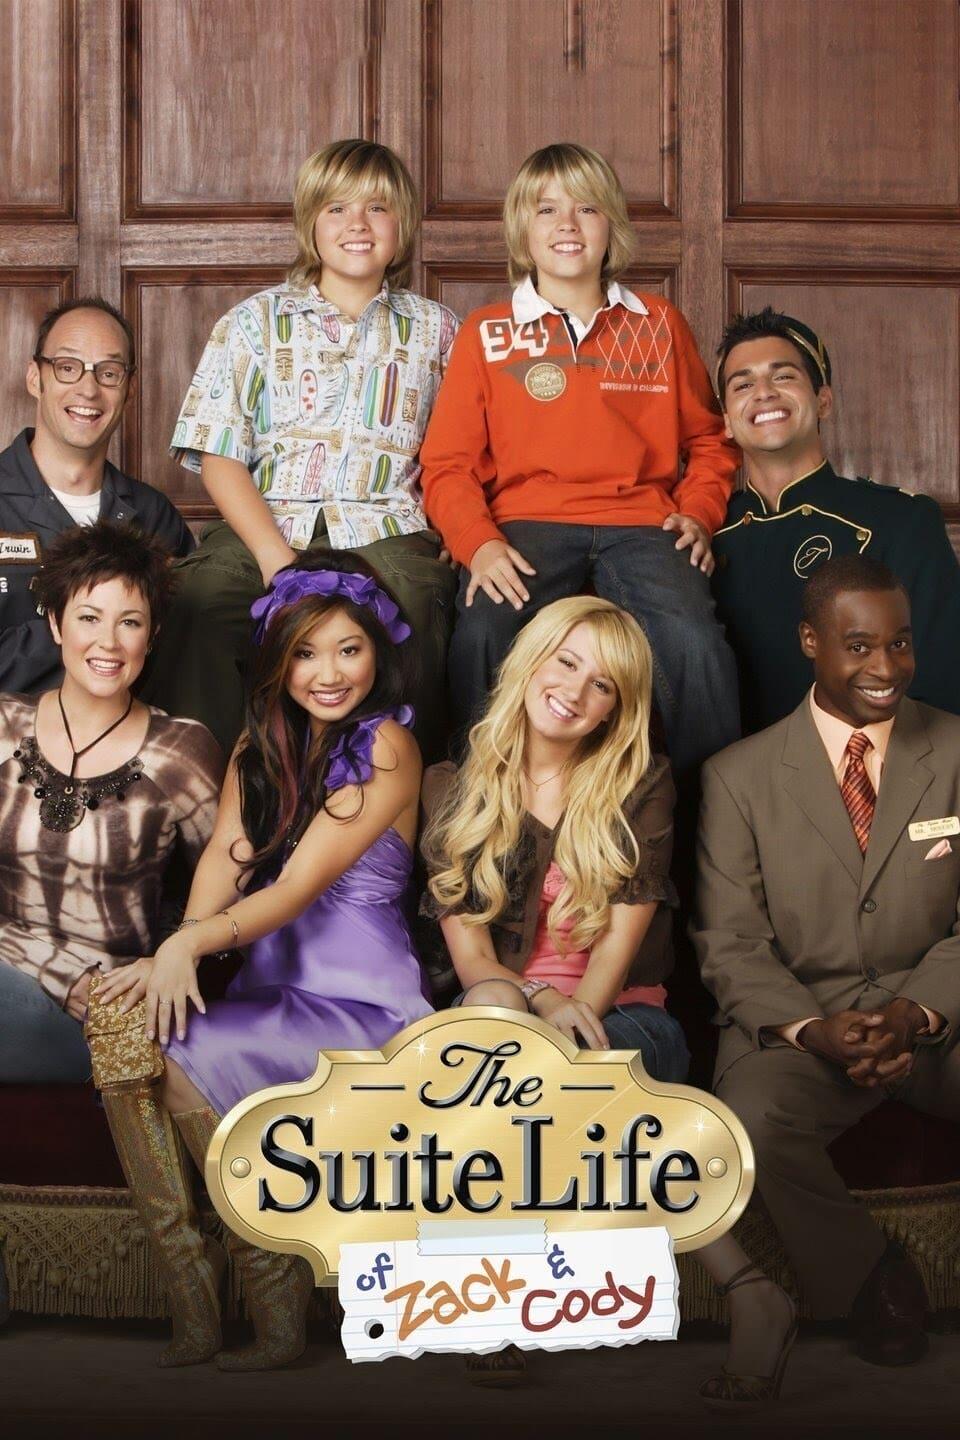 The Suite Life of Zack & Cody poster